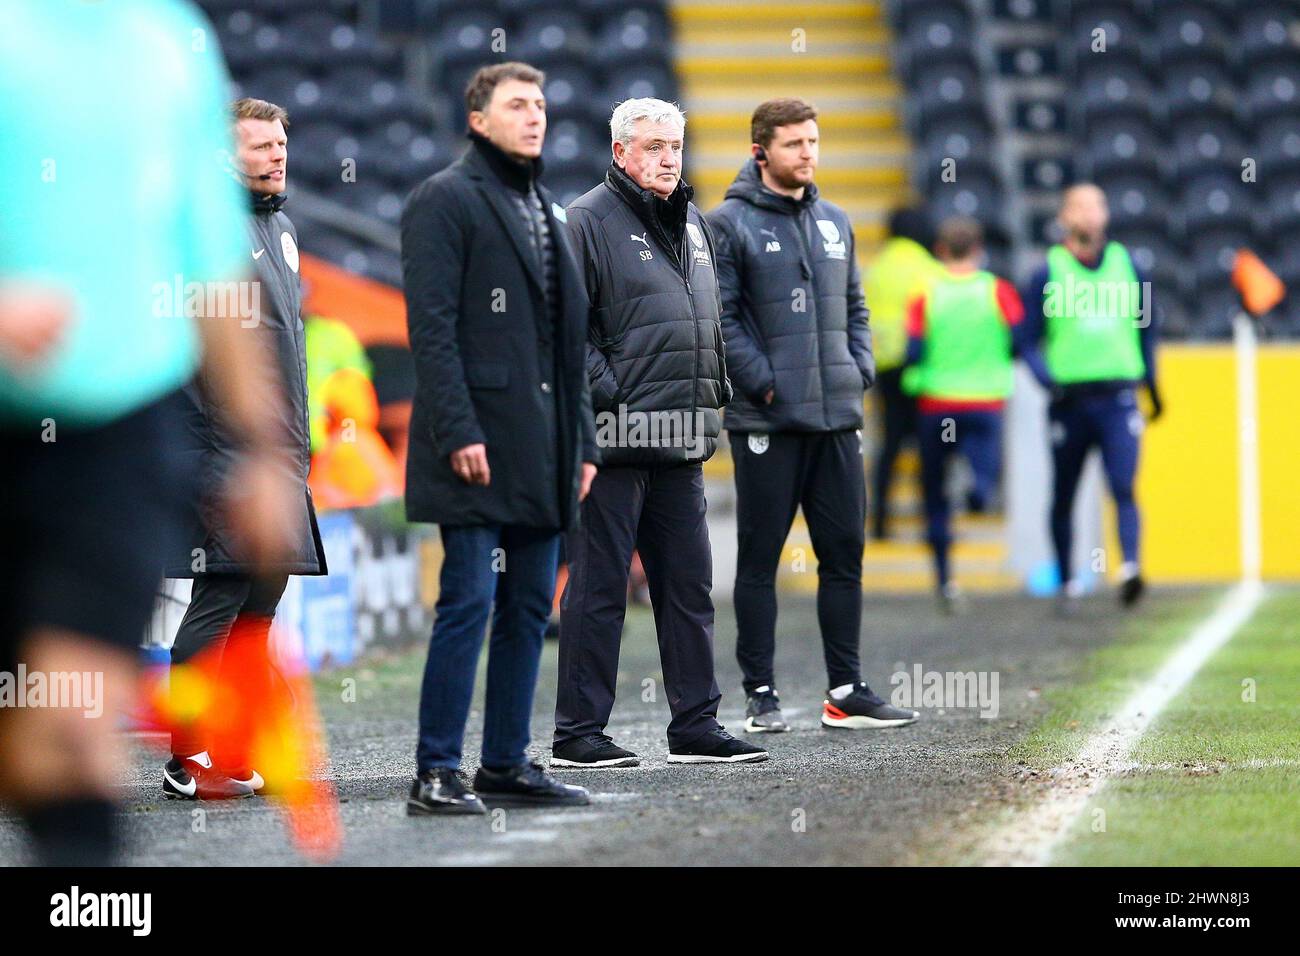 MKM Stadium, Hull, Angleterre - 5th mars 2022 Steve Bruce Directeur de West Bromwich - pendant le match Hull City / West Bromwich Albion, EFL Championship 2021/22 MKM Stadium, Hull, Angleterre - 5th mars 2022 crédit: Arthur Haigh/WhiteRosePhotos/Alay Live News Banque D'Images